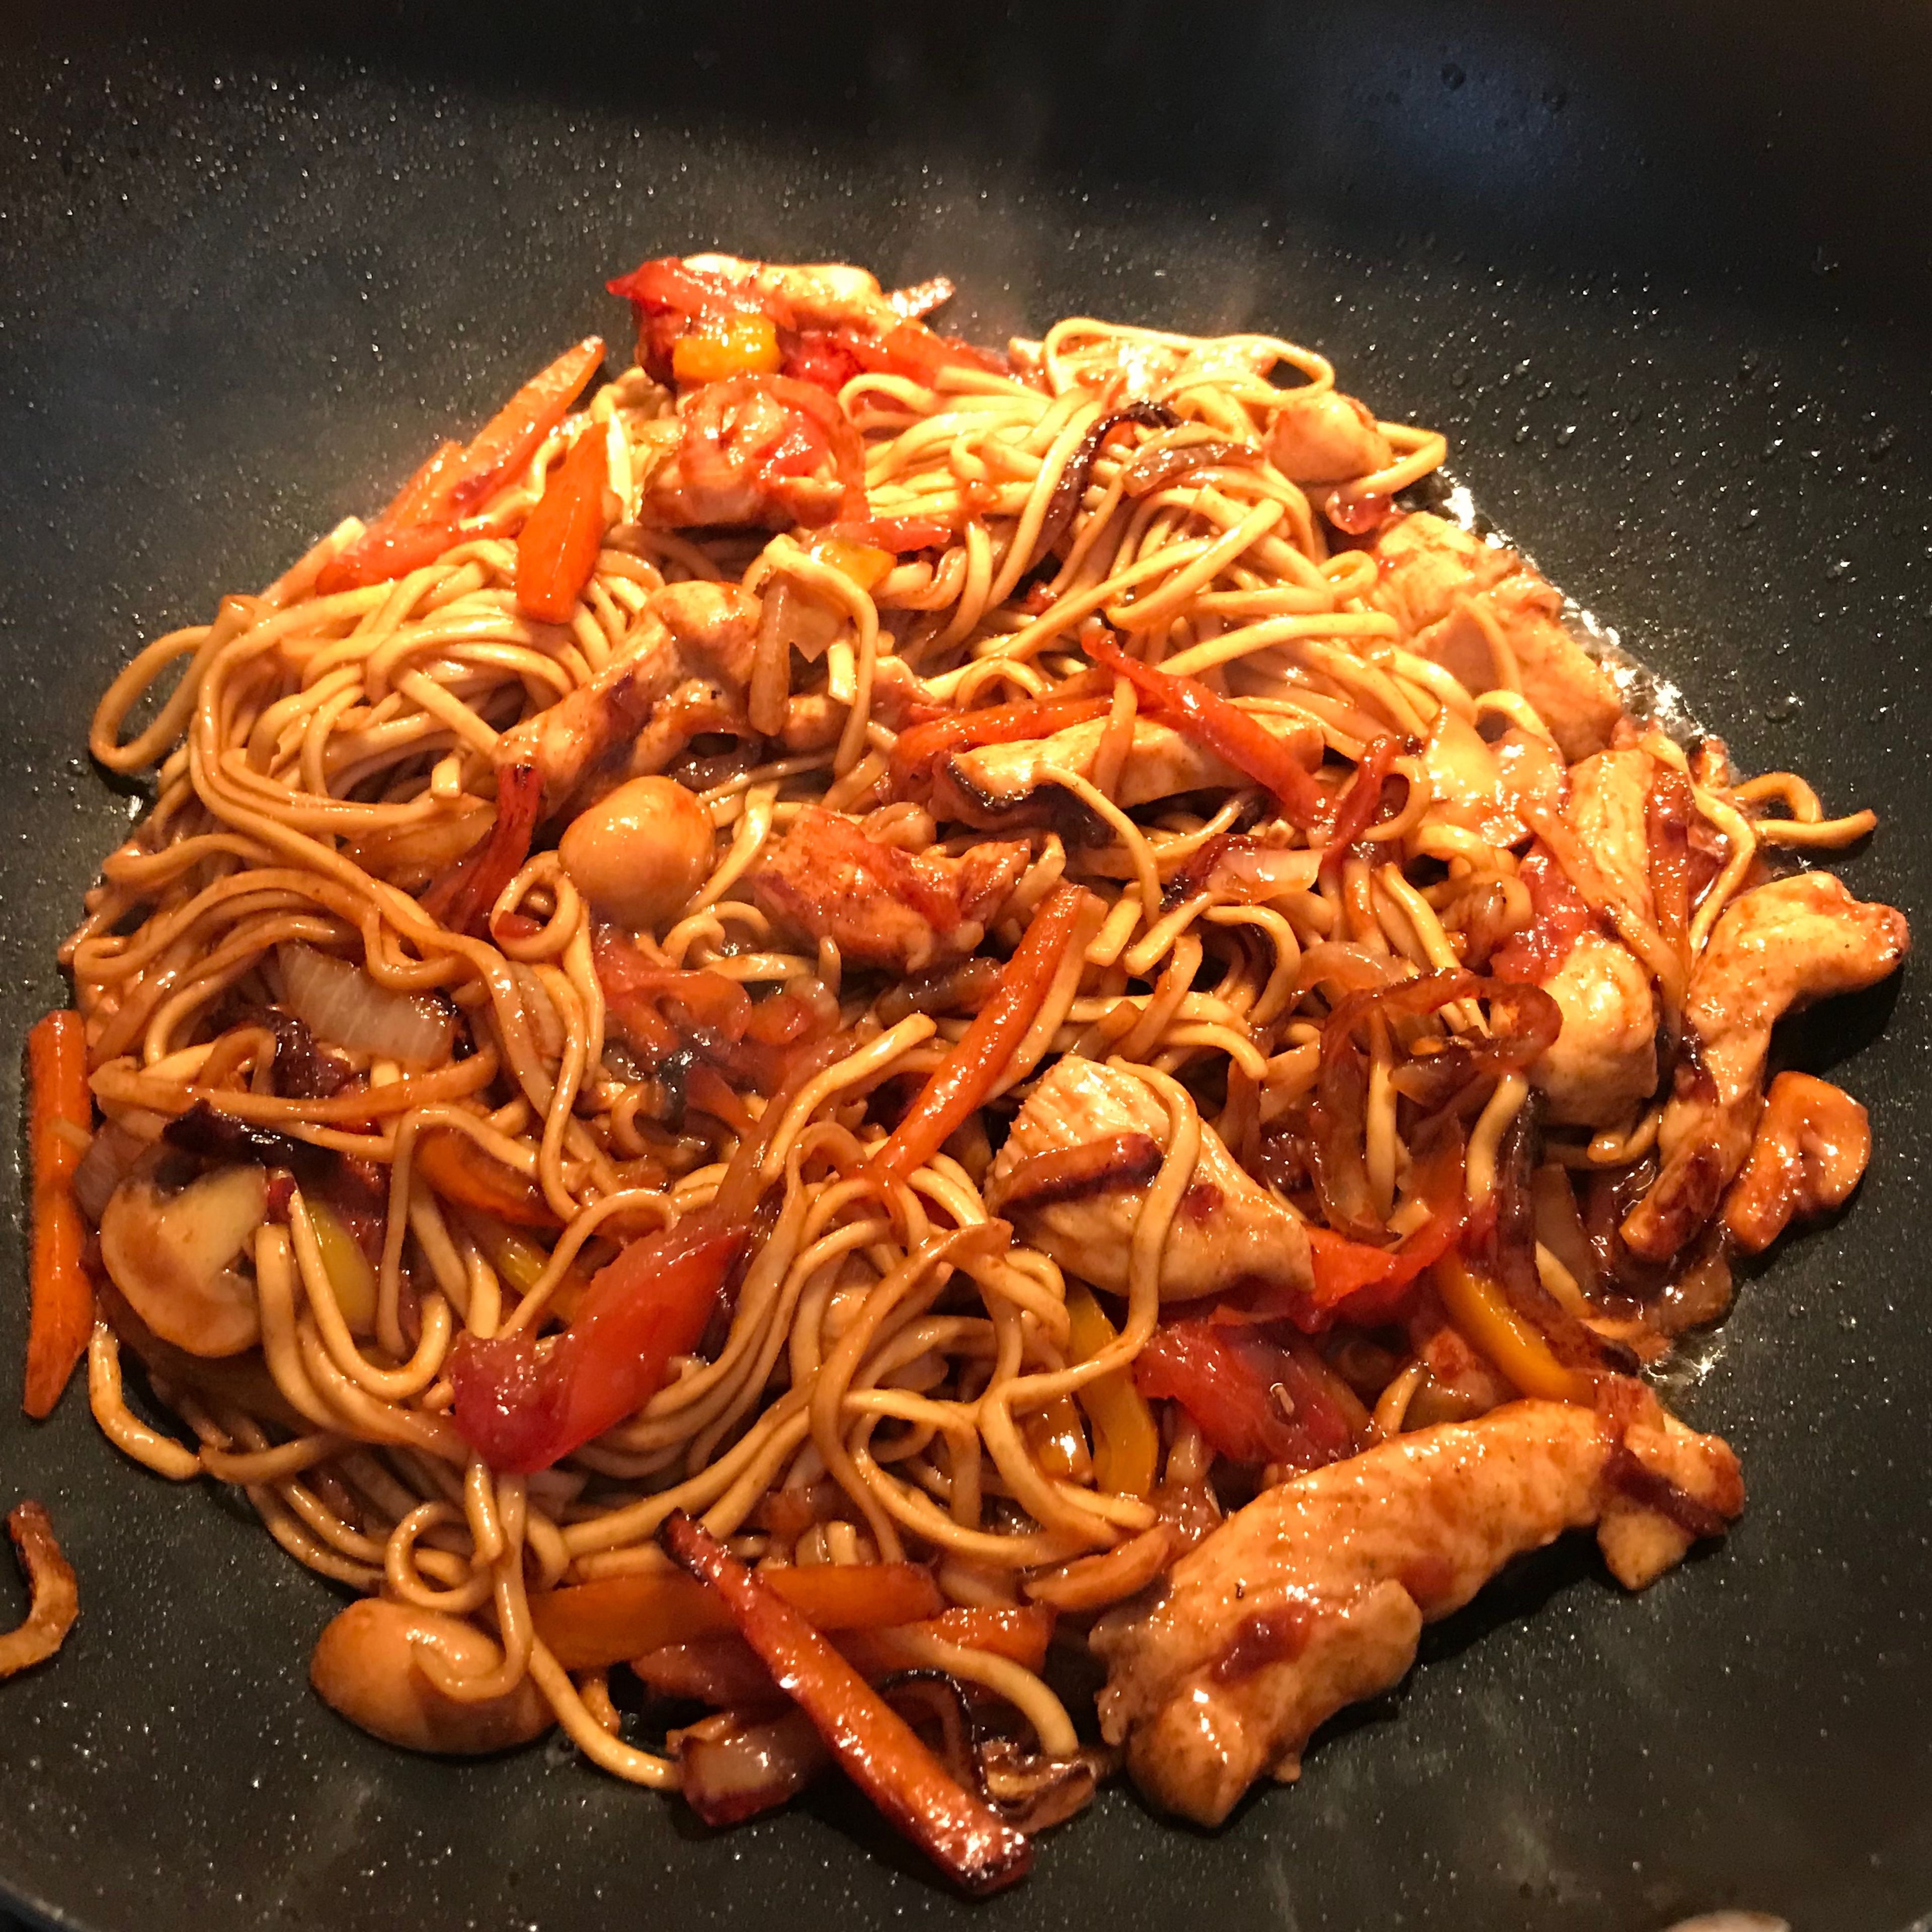 Heat oil in Wok pan and add onions, fry on high heat 1 min , then add carrots and red pepper fry for 2 min. After add mushrooms and tomatoes, stir and fry for 1 min. Make heat little less and add chicken, cook for 2-3min, then add egg noodles on top vinegar, brown sugar and soya sauce. Stir and fry for 3 min.